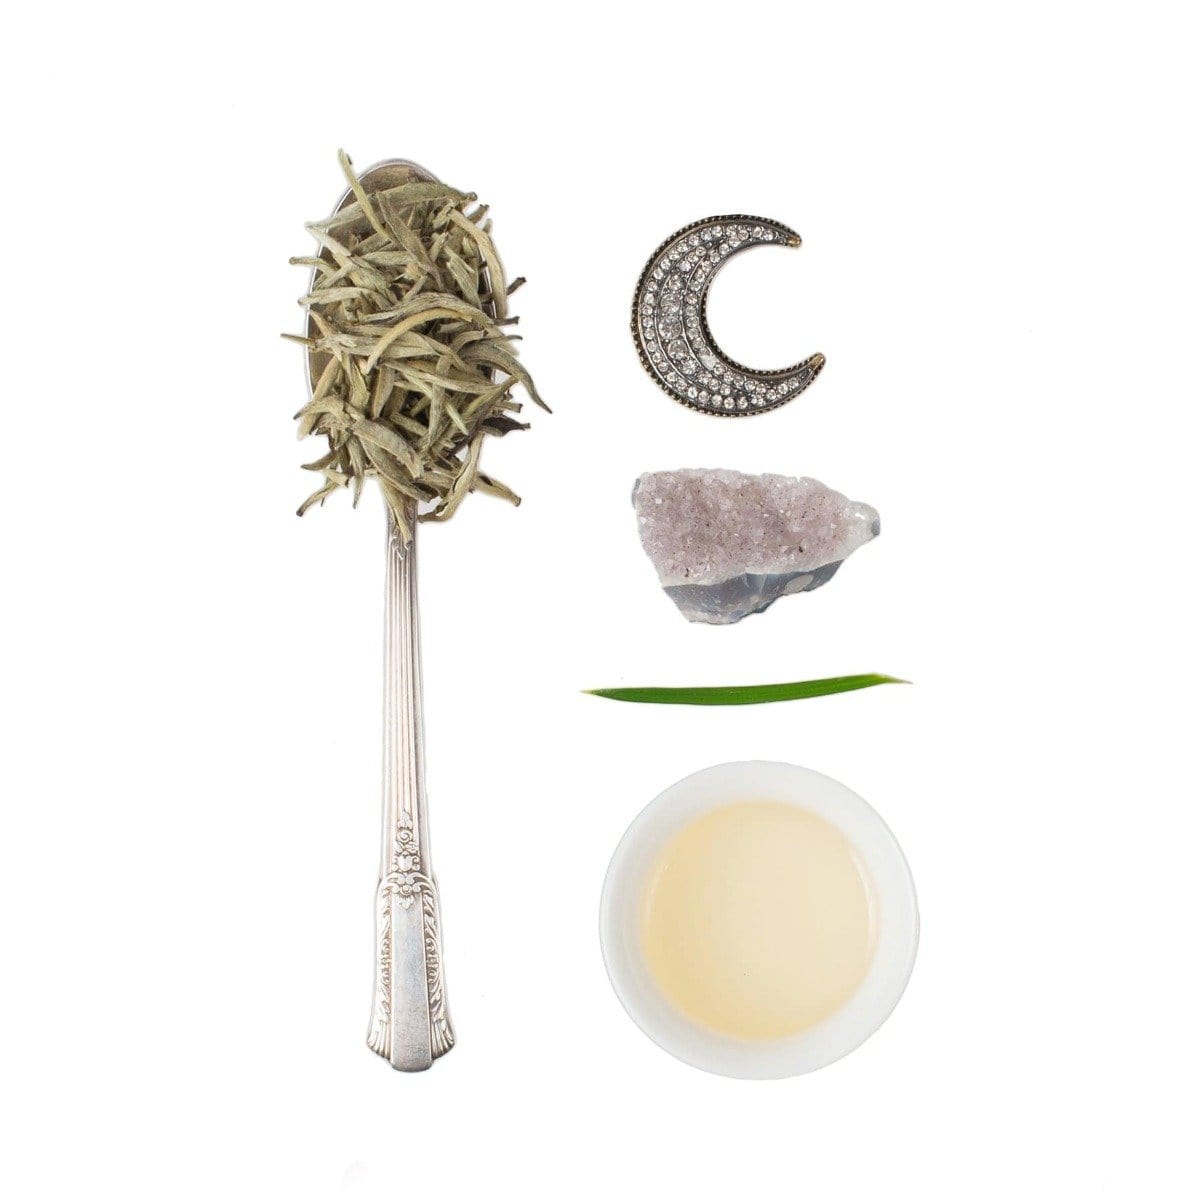 A flat lay image features a silver spoon filled with dried herbs, a beaded crescent moon, a small piece of amethyst crystal, a green leaf blade, and a white bowl containing light-colored Silver Moon White Tea from Club Magic Hour, all artfully arranged on a white background.